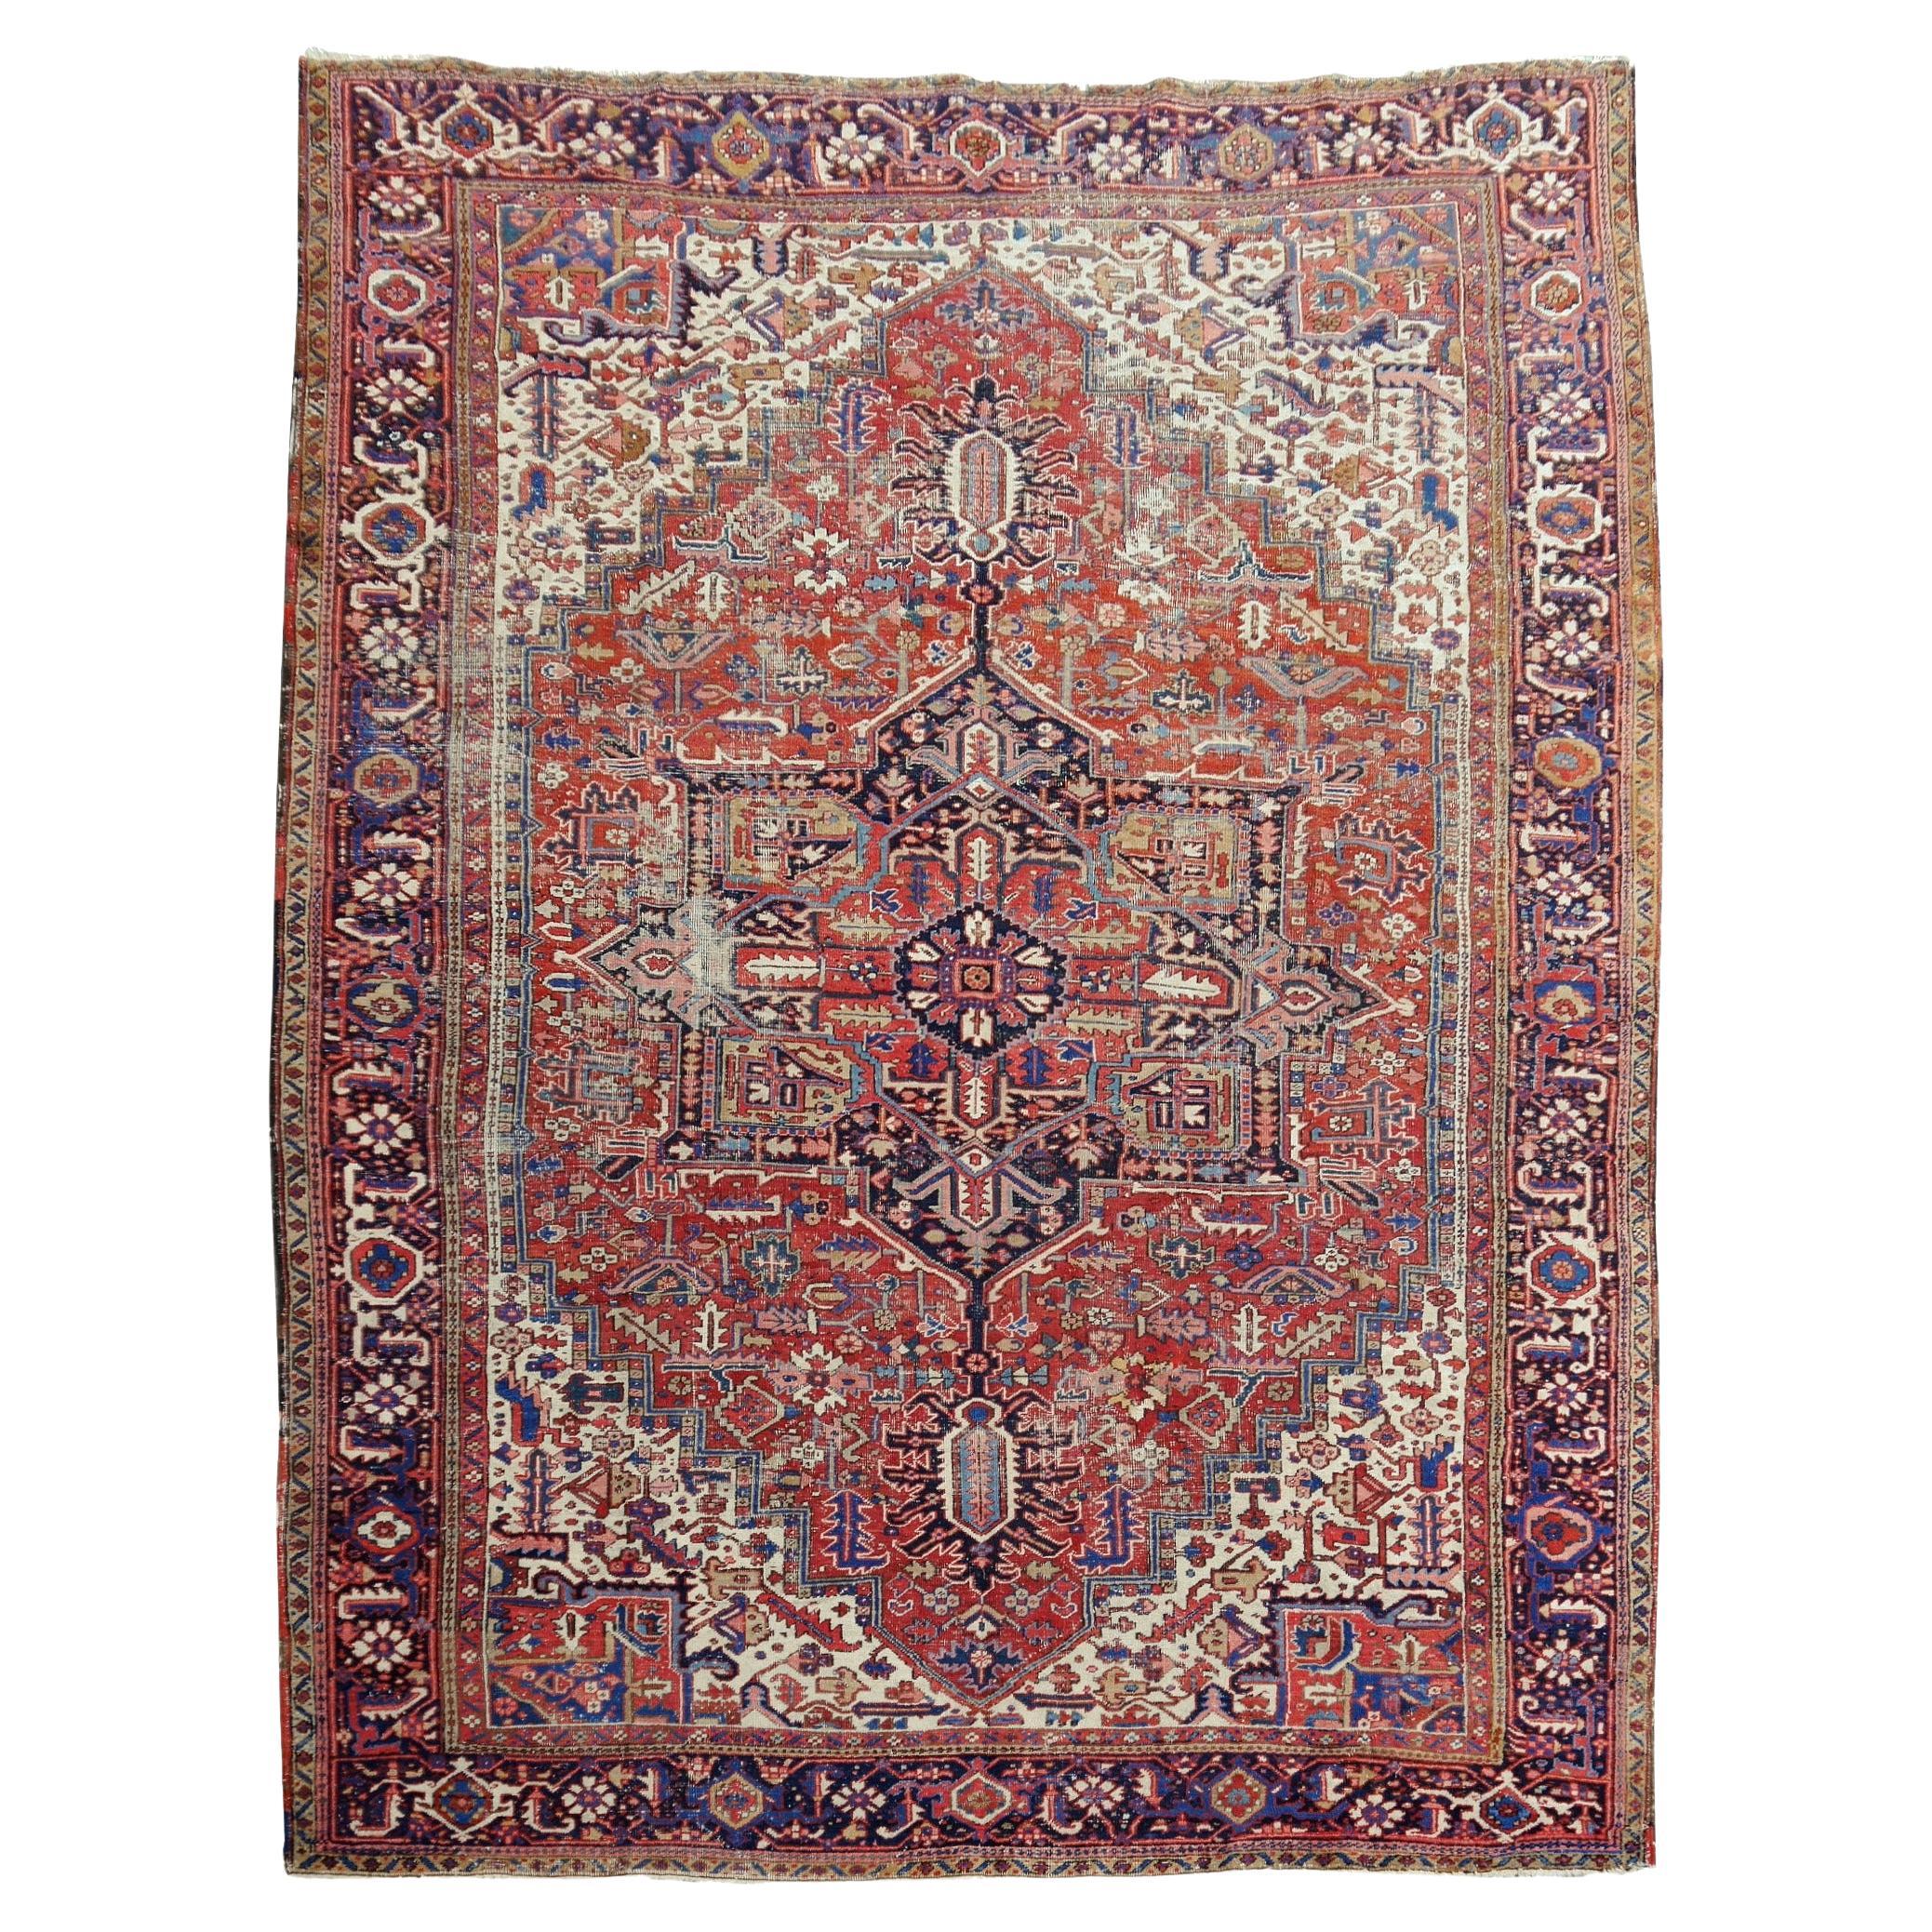 Antique Heriz Rug 10x13 ft Distressed Classic Vintage Carpet worn to perfection For Sale